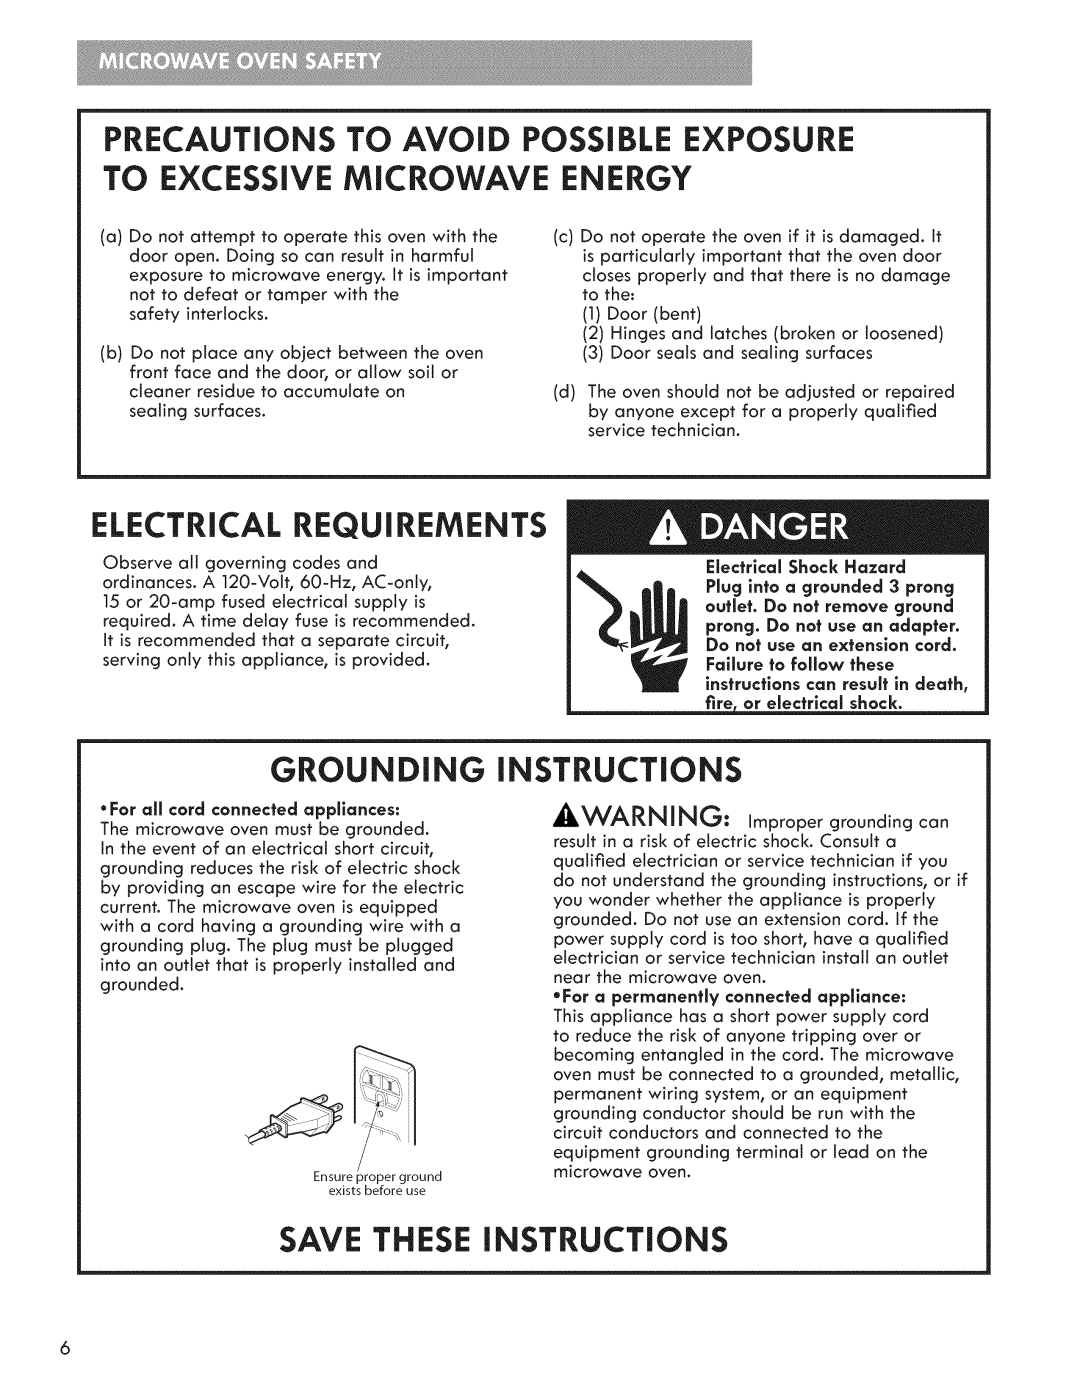 Kenmore 721.7915 manual Electrical Requirements, Grounding, iNSTRUCTiONS, Save These Instructions 